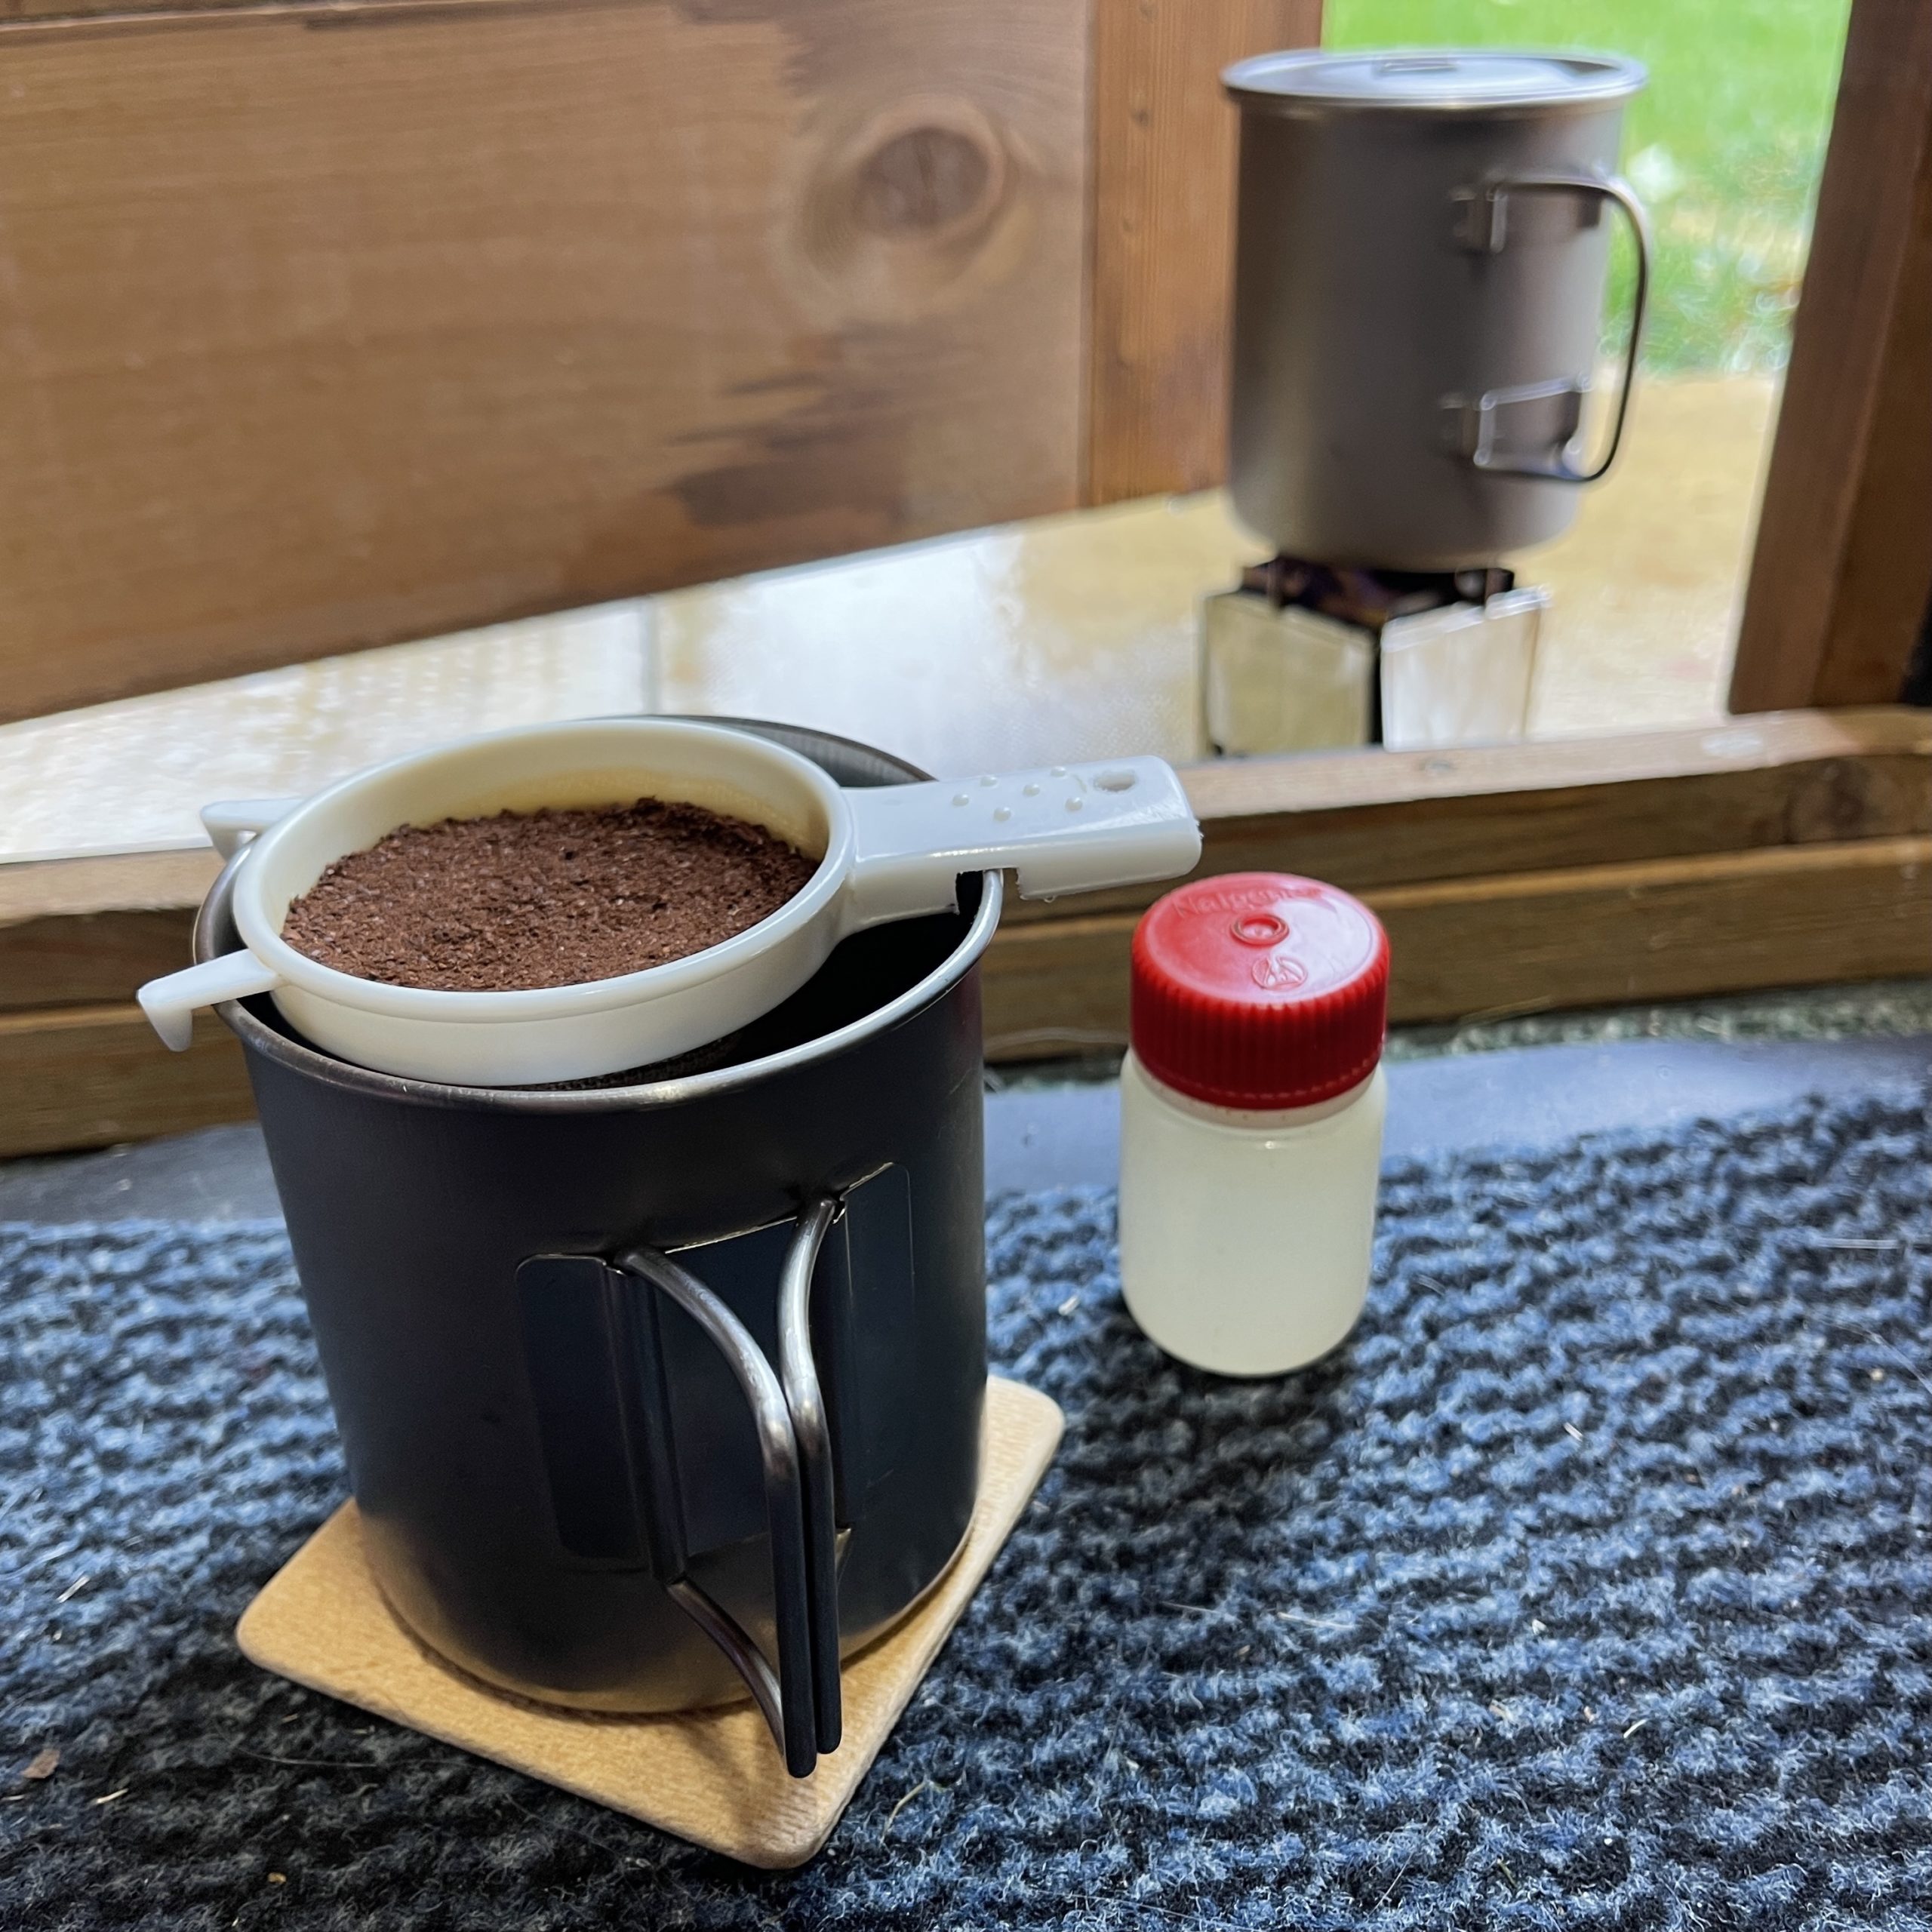 Making camping coffee in the office